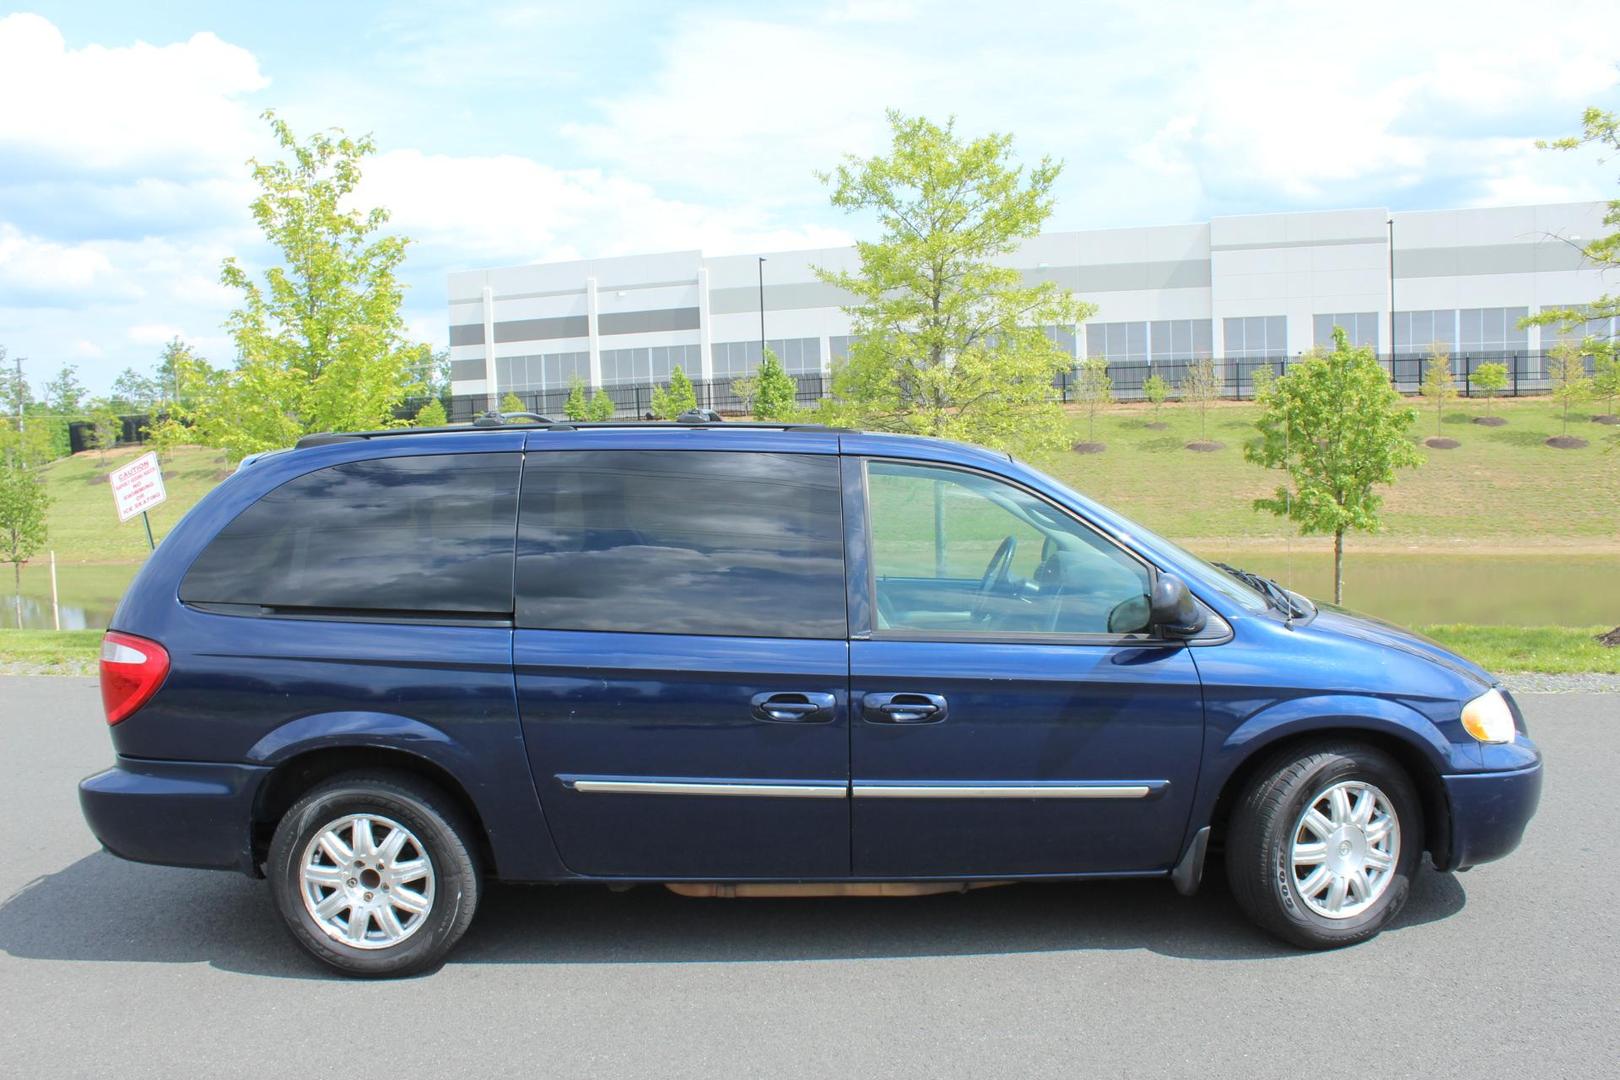 USED CHRYSLER TOWN & COUNTRY 2005 for sale in Chantilly